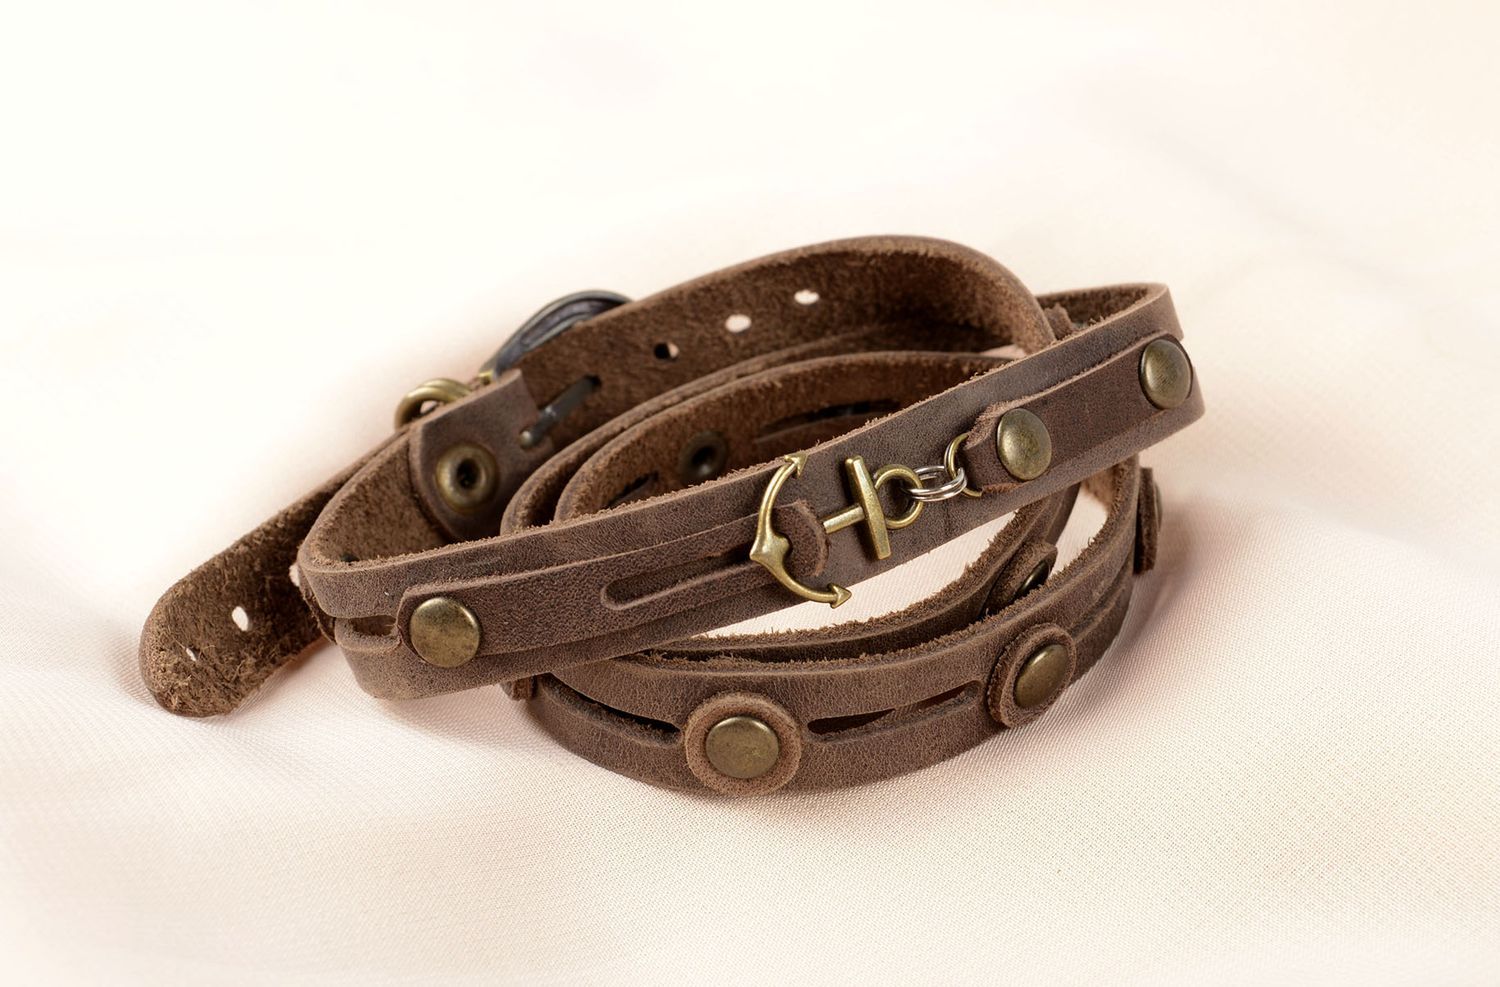 Handmade leather bracelet cool jewelry designs leather goods gift ideas photo 5